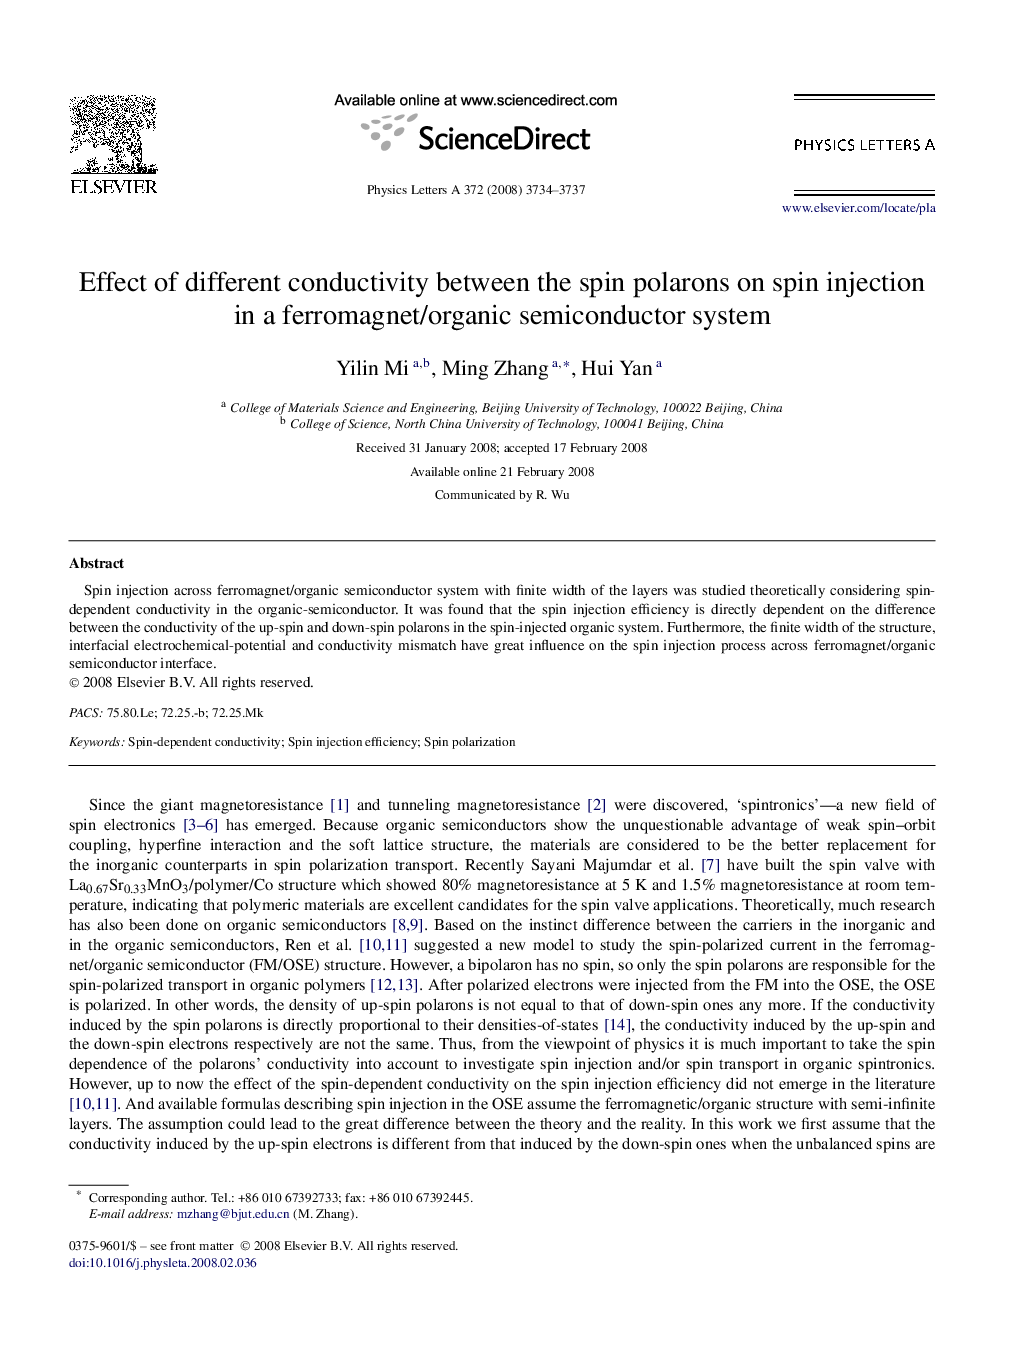 Effect of different conductivity between the spin polarons on spin injection in a ferromagnet/organic semiconductor system